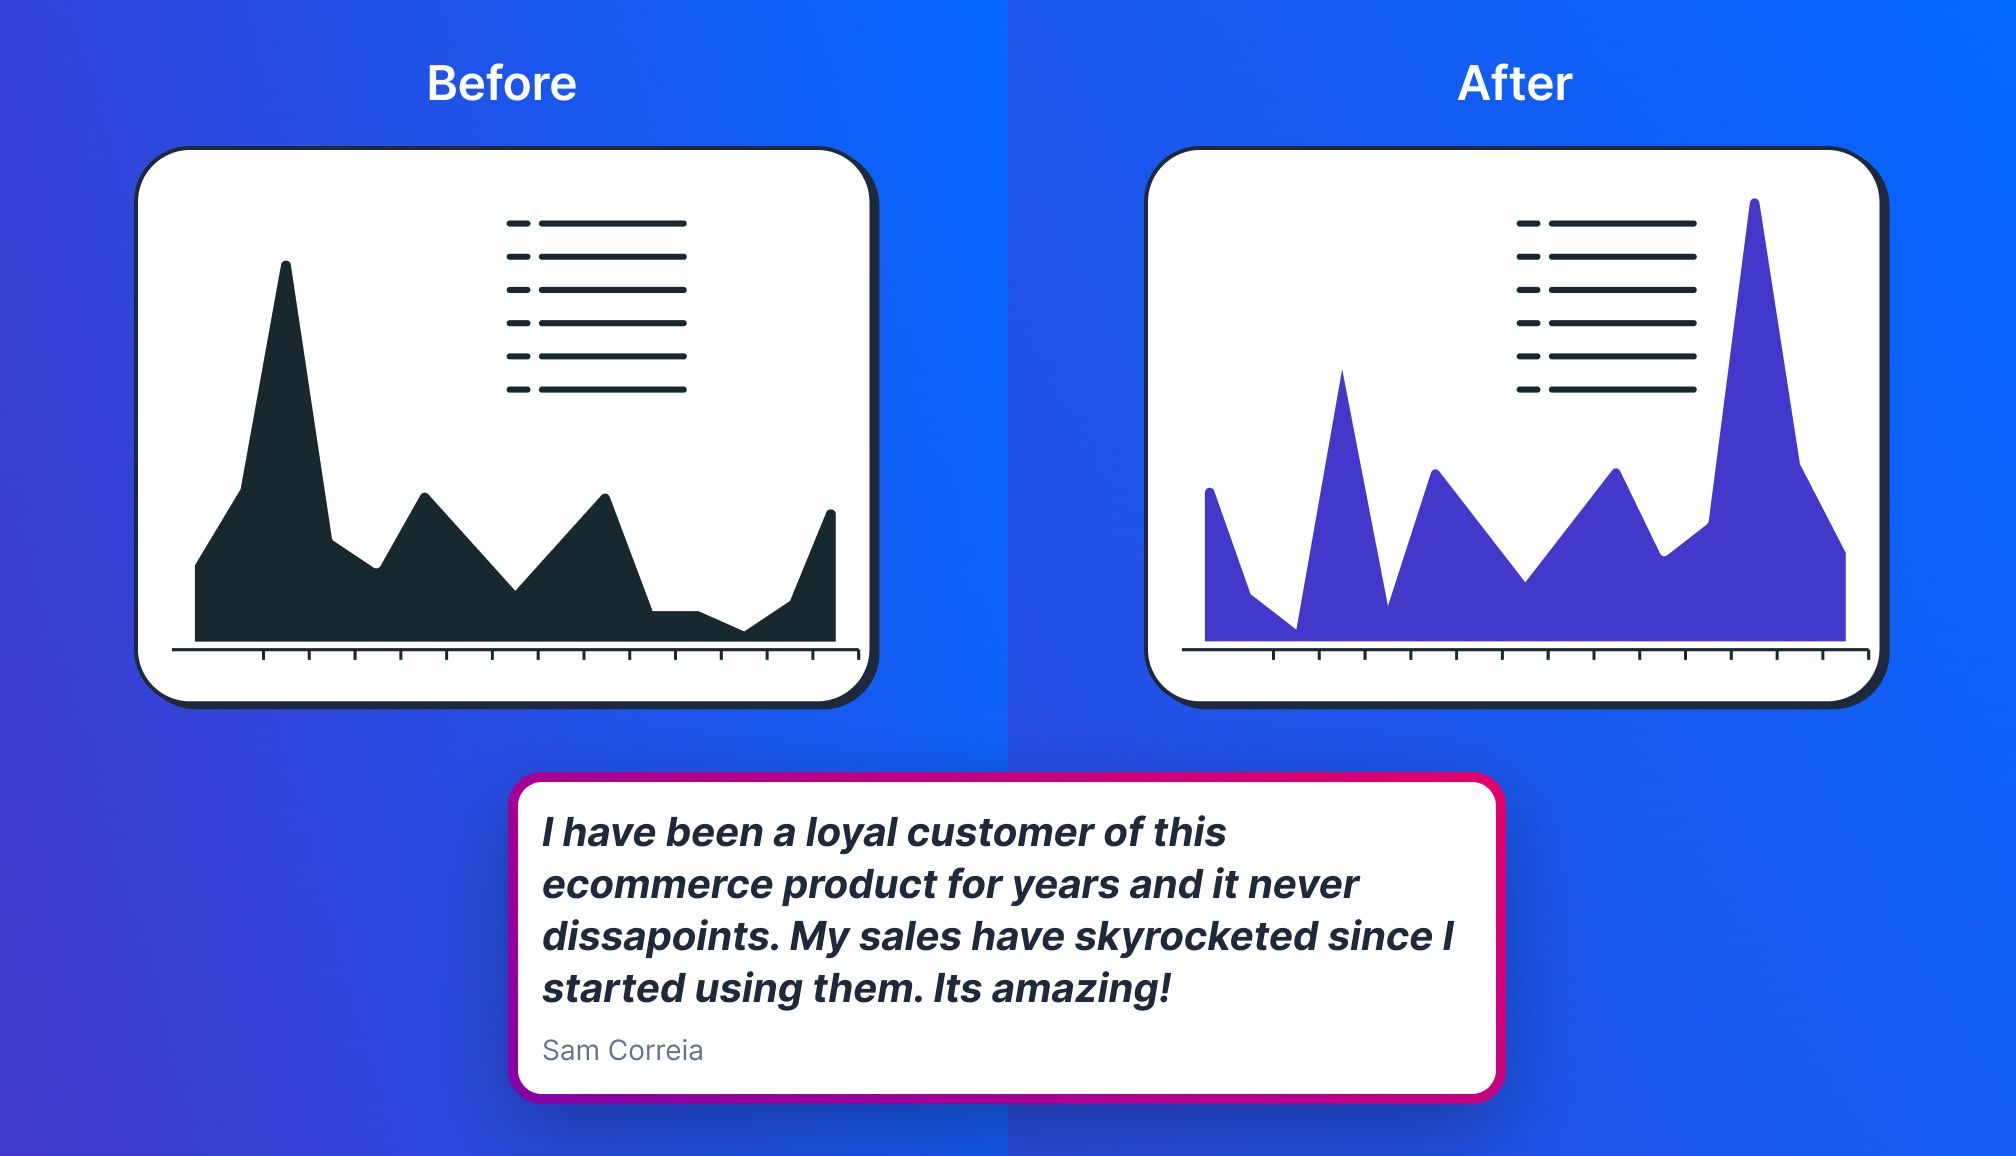 Testimonials featuring before and after images of sales growth